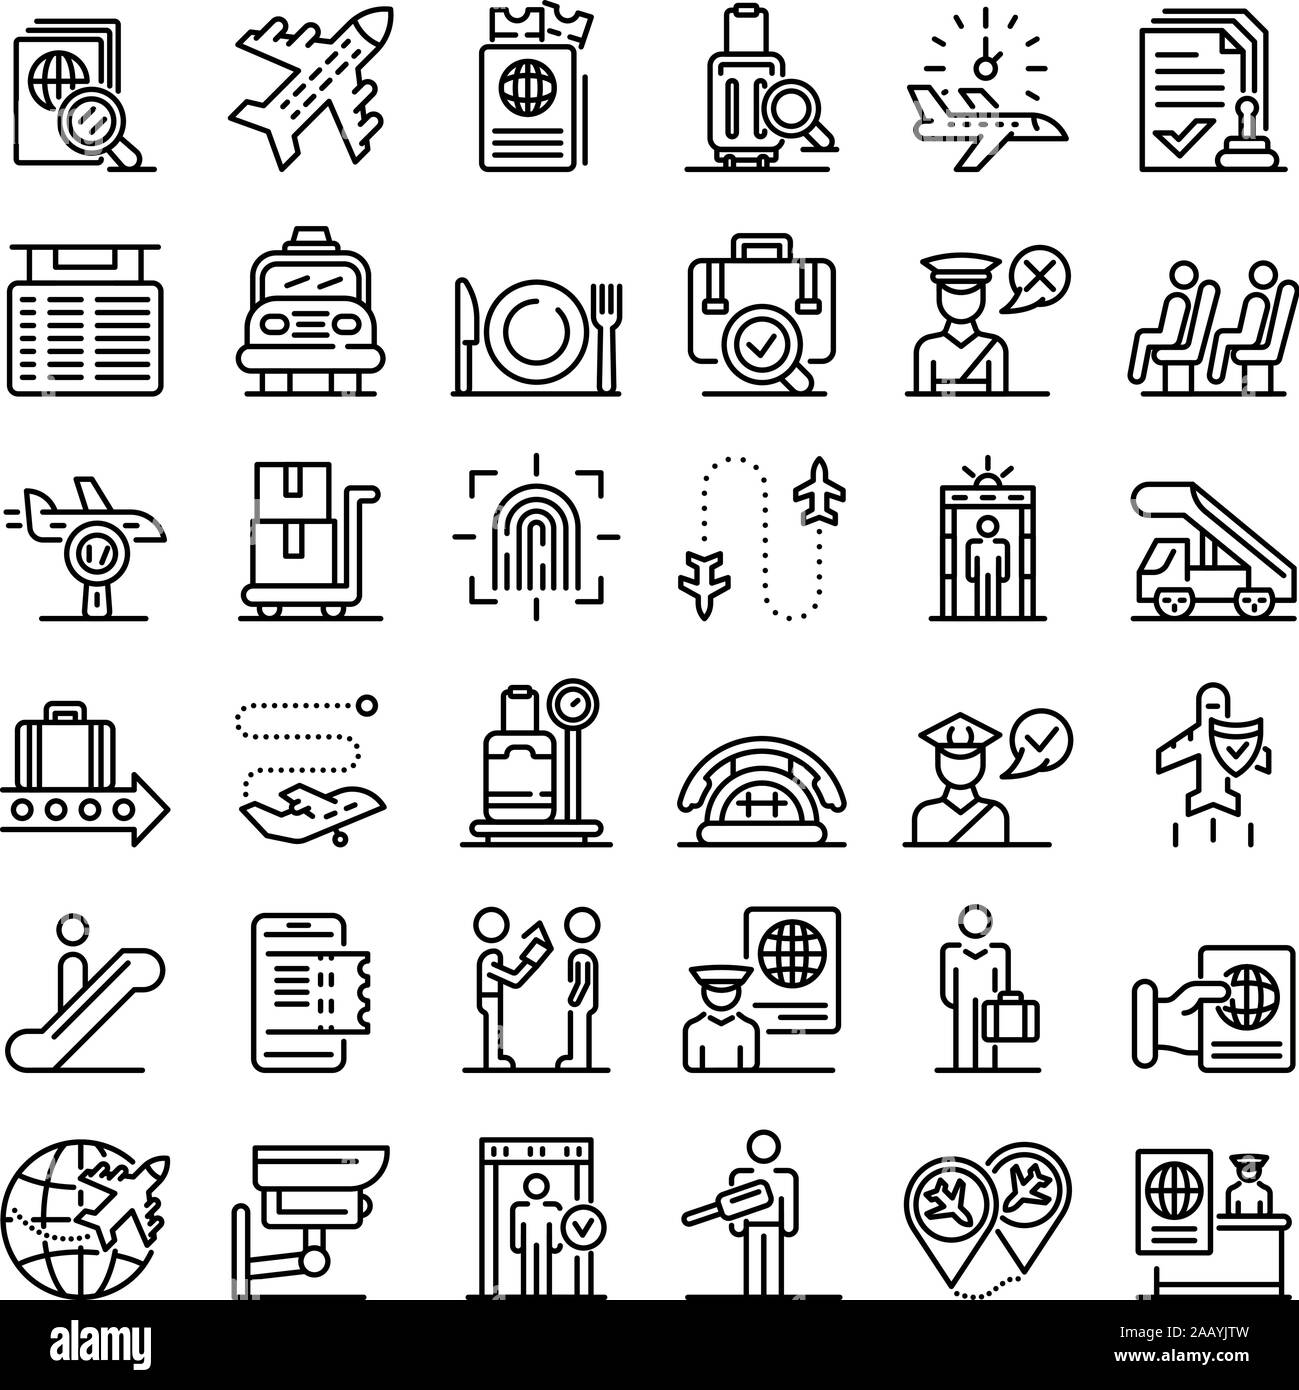 Passport control icons set, outline style Stock Vector